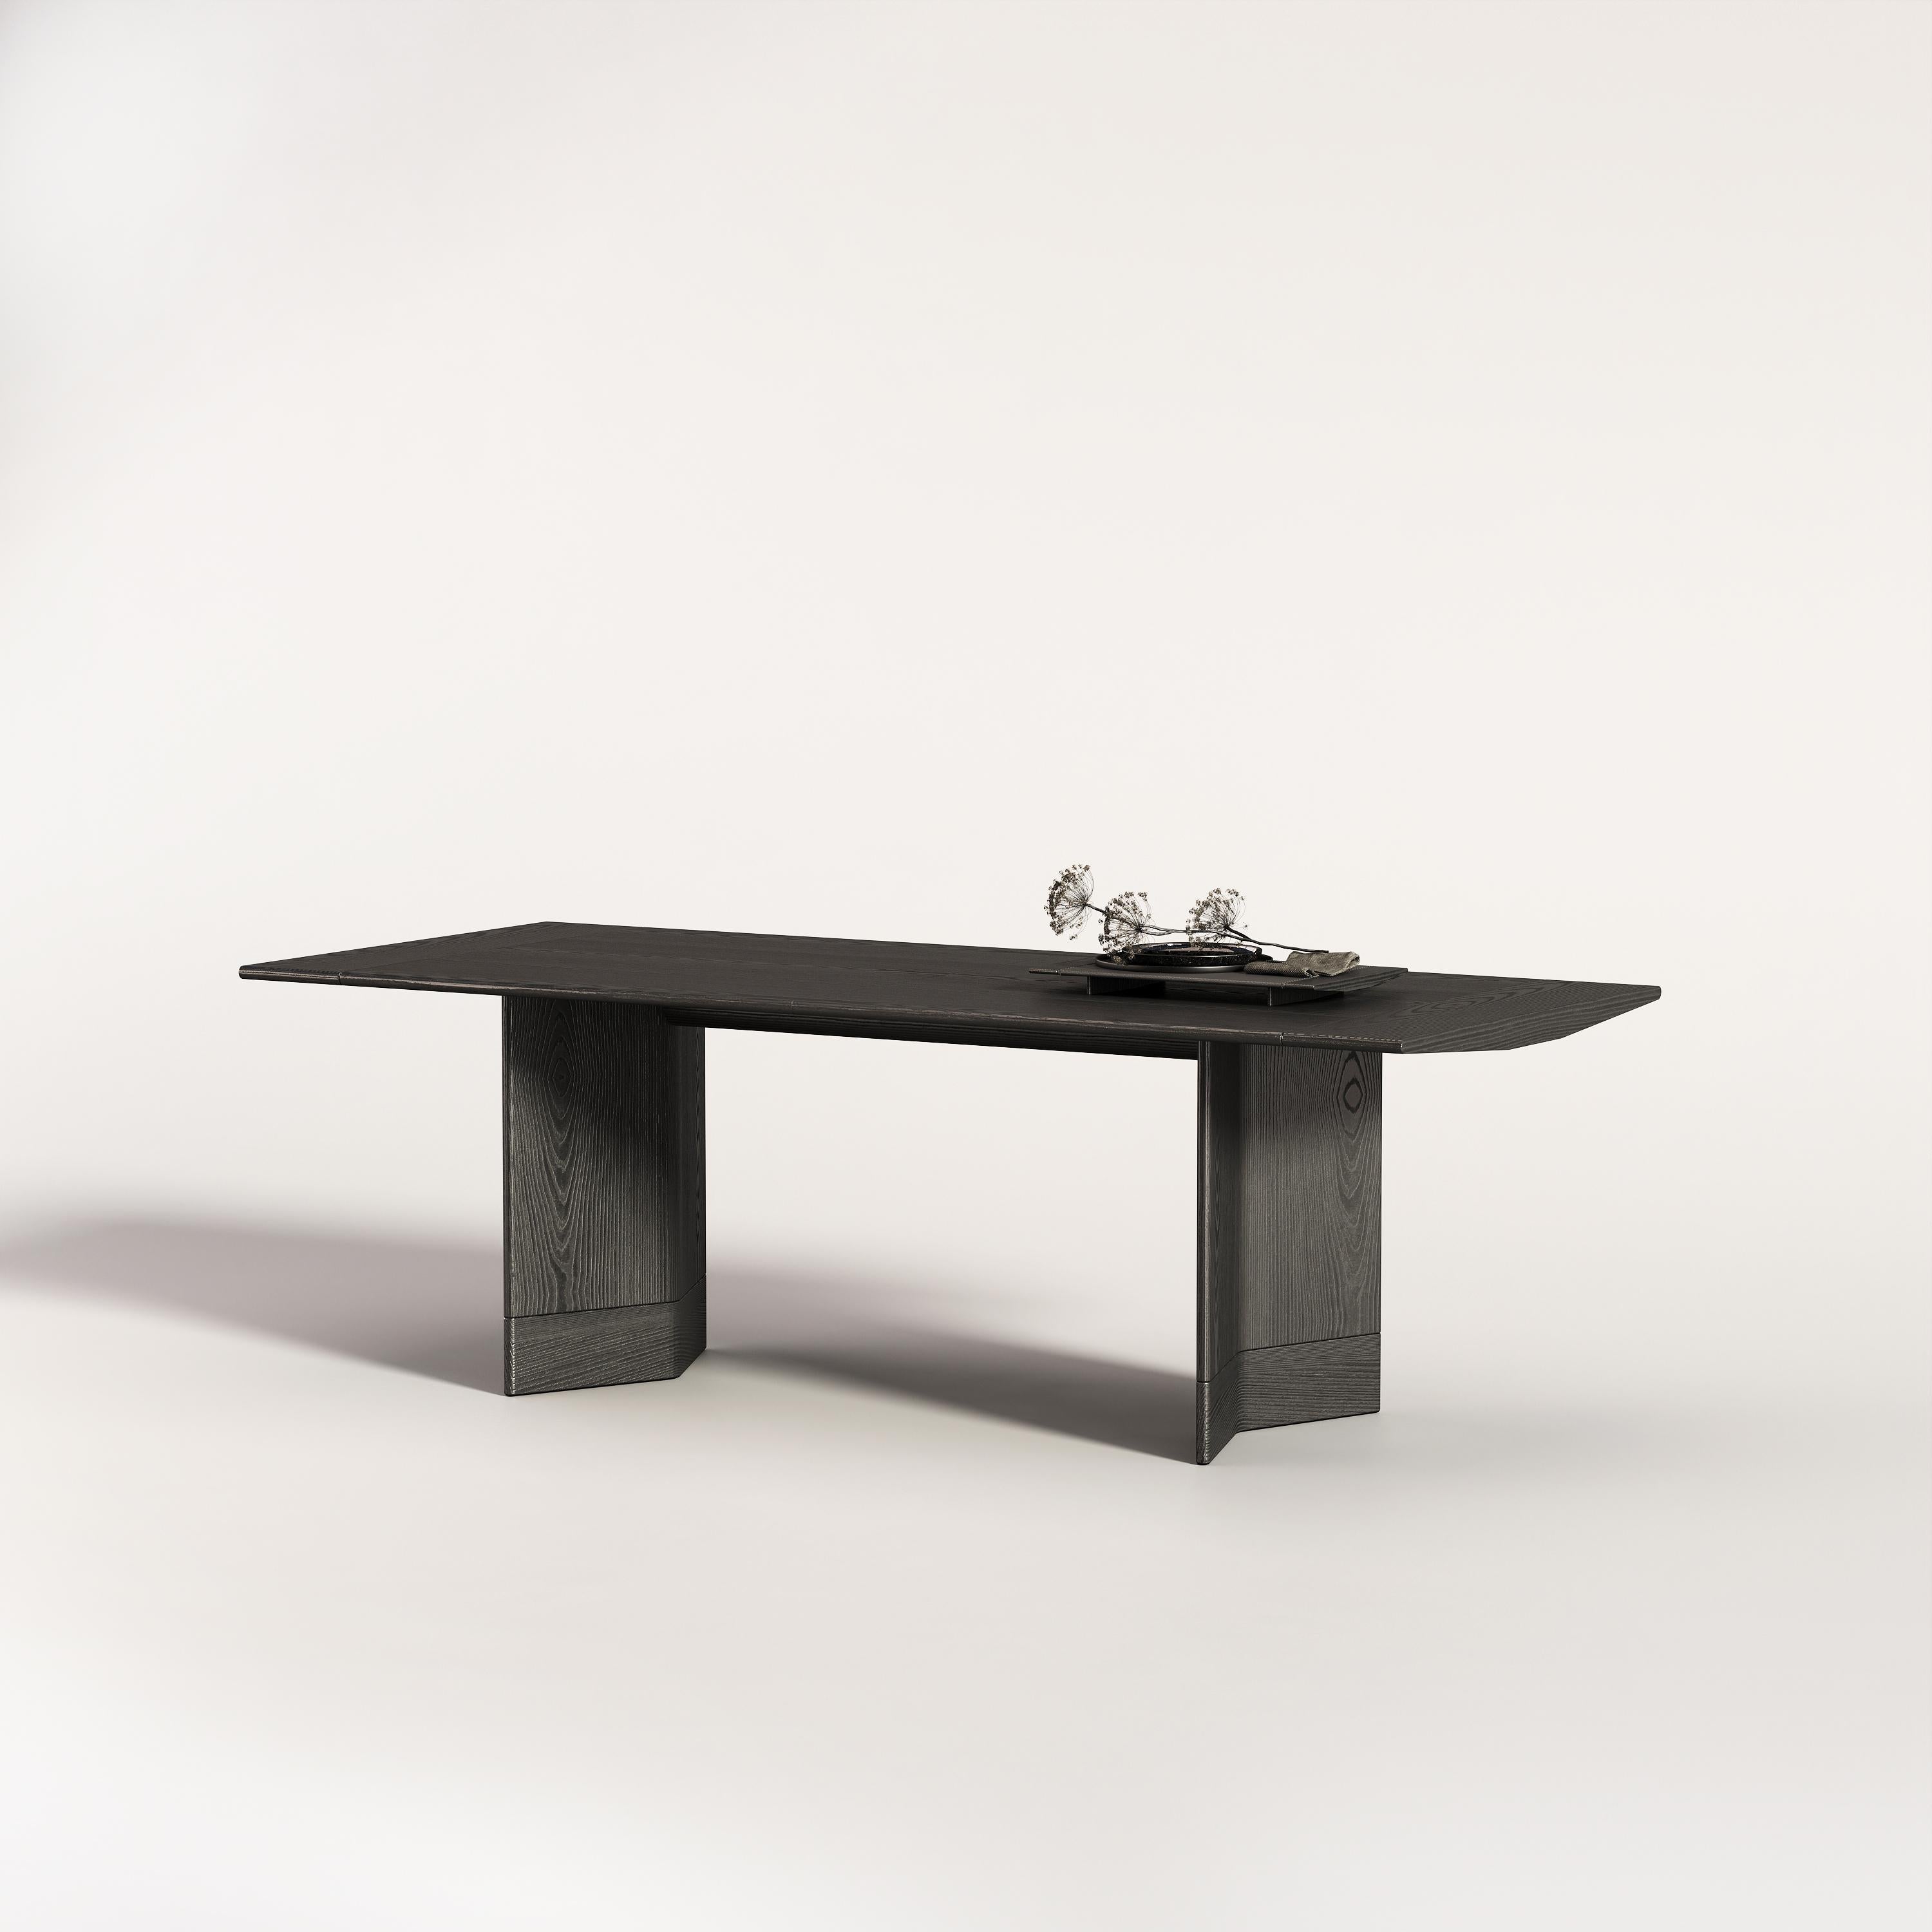 Temple dining table by Emre Yunus Uzun
Dimensions: D 210 x W 90 x H 72 cm
Materials: Brushed oak wood.
Custom sizes and finishes available.

Temple Collection consists of three complimentary pieces; a table, a bench and a tabletop tray. The coherent